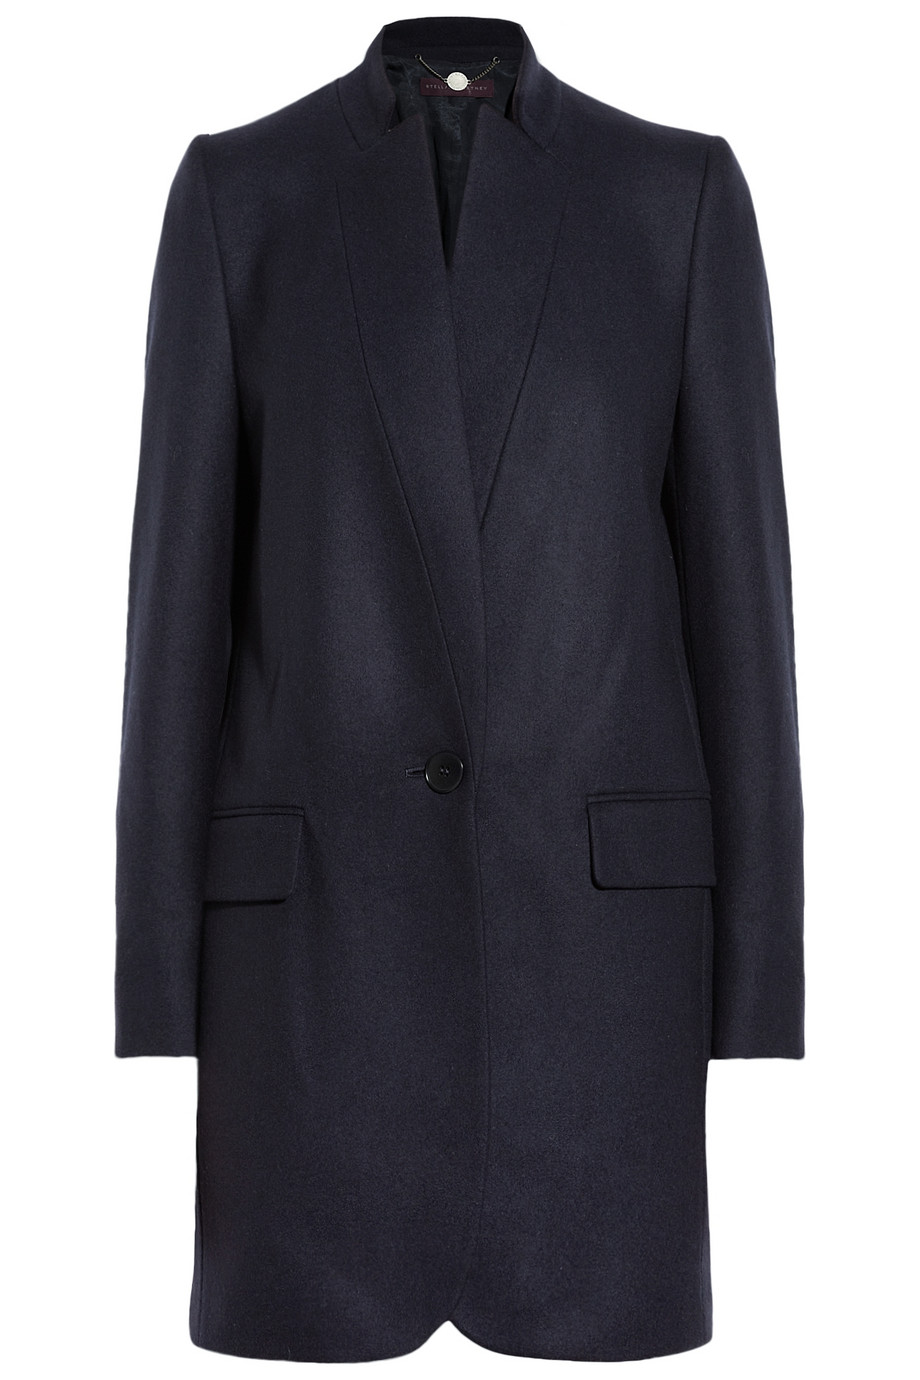 Stella Mccartney Bryce Wool and Cashmere Blend Coat in Blue (navy) | Lyst